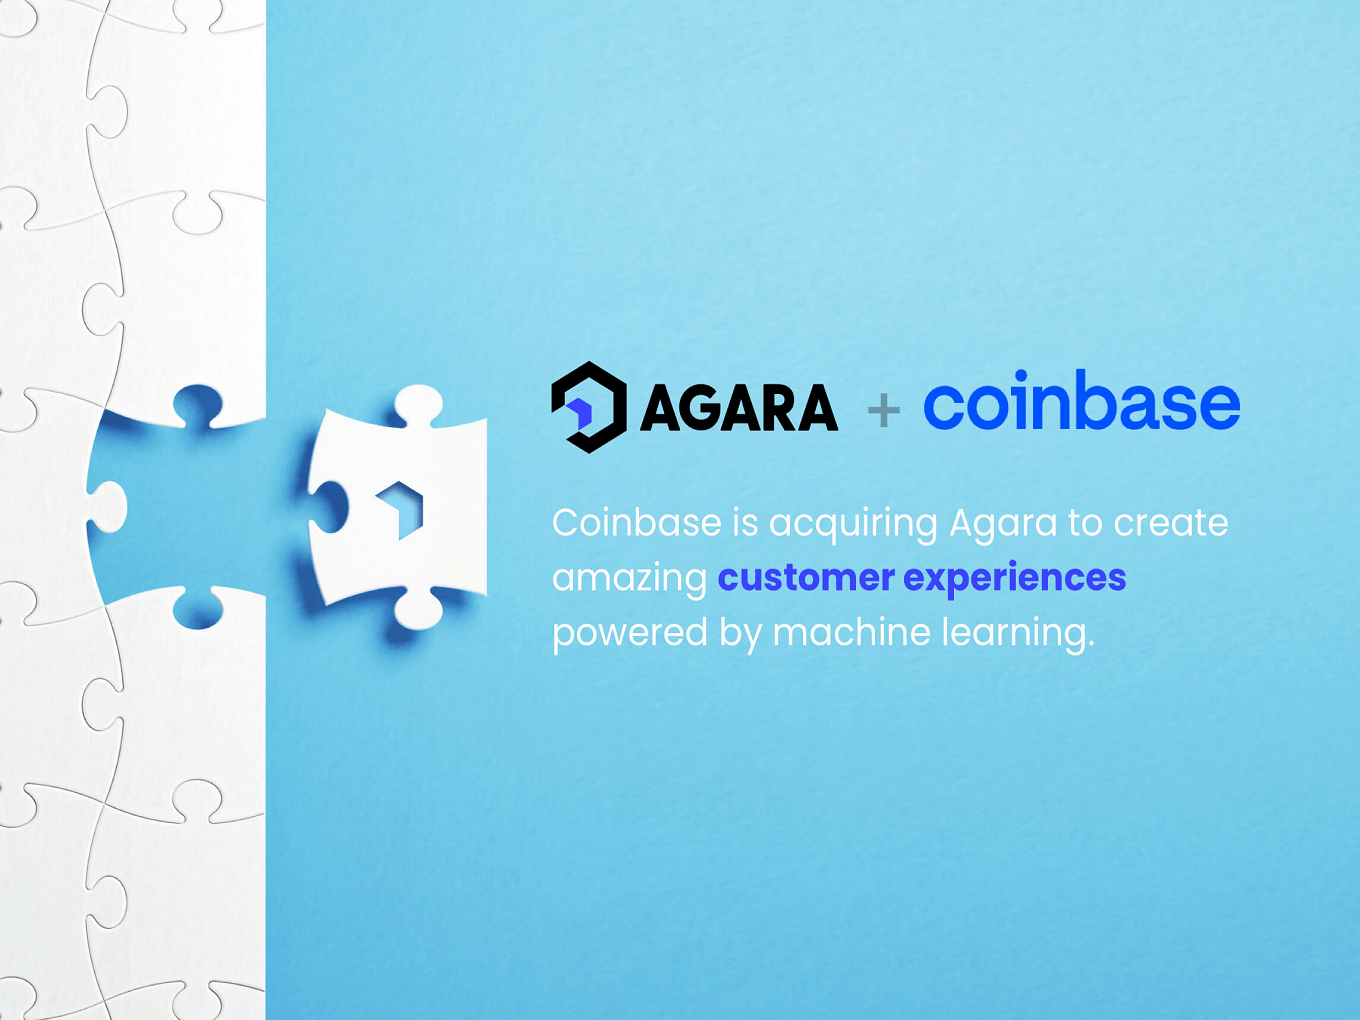 nasdaq-listed coinbase marks first acquisition in india with agara